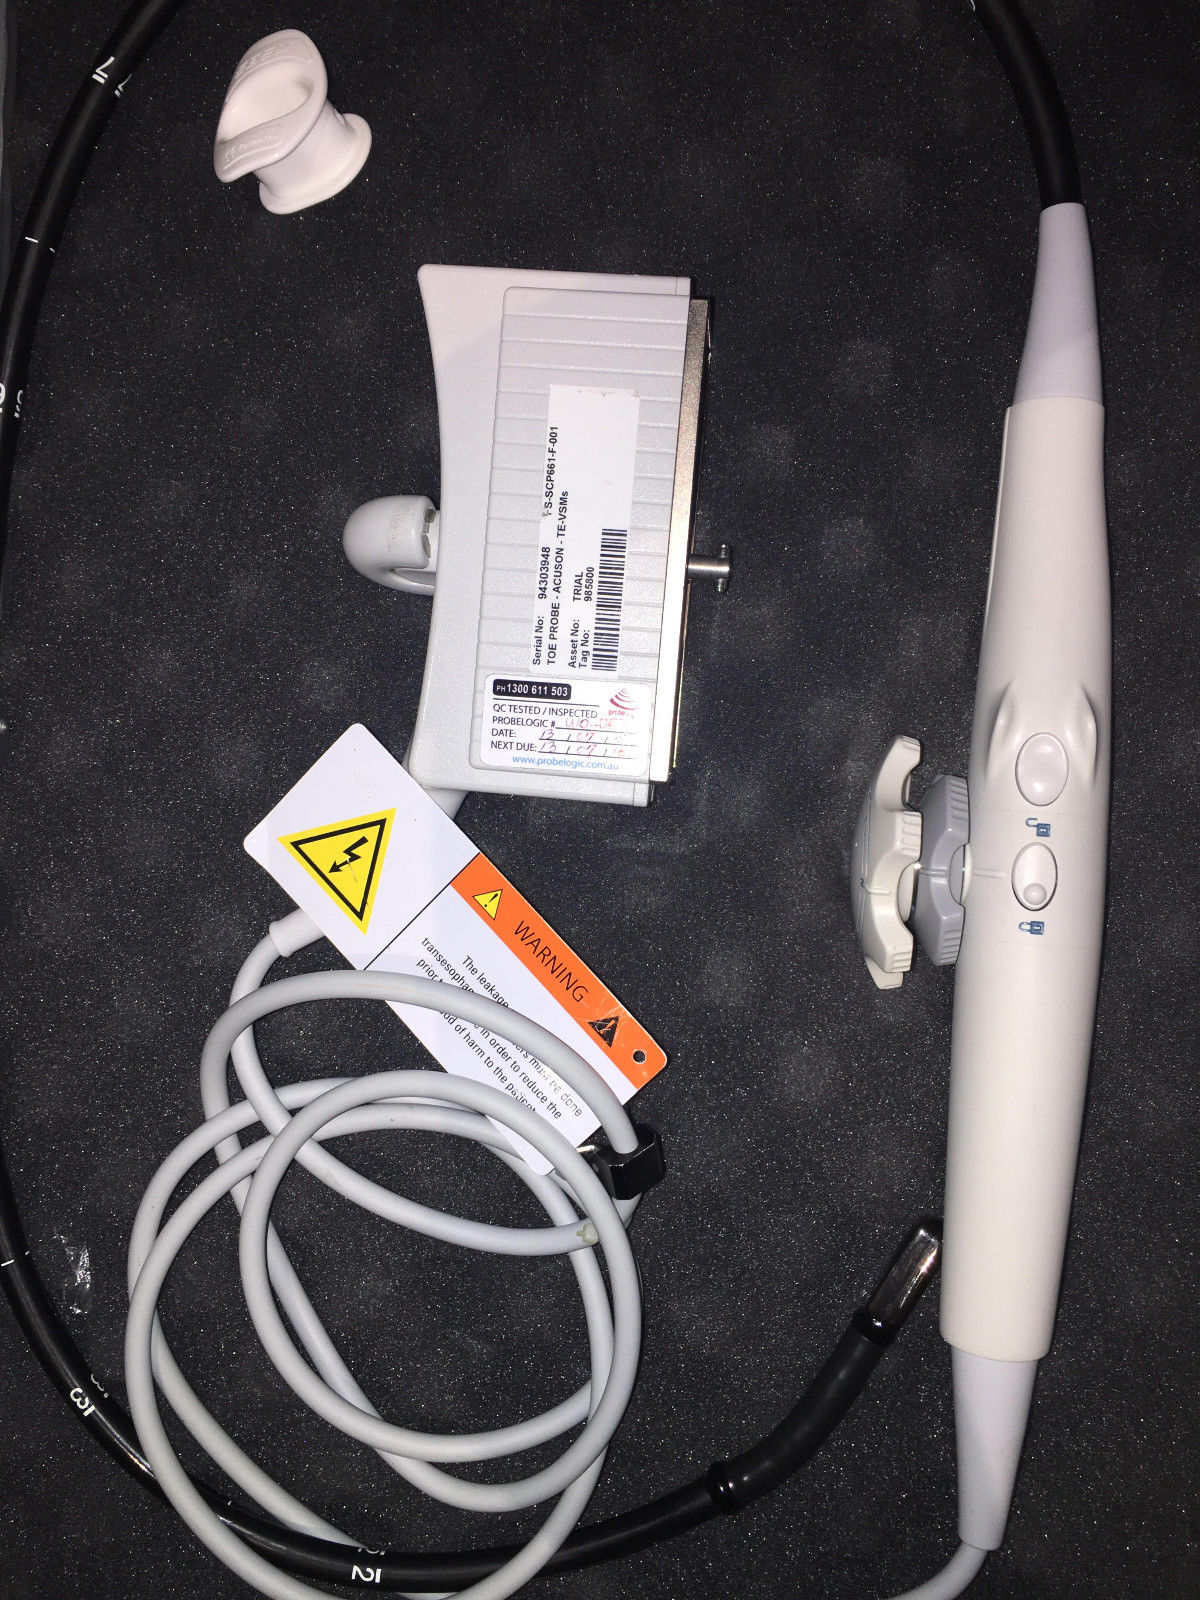 SIEMENS ACUSON TE-V5Ms ULTRASOUND PROBE - PERFECT - RECENTLY CERTIFIED DIAGNOSTIC ULTRASOUND MACHINES FOR SALE